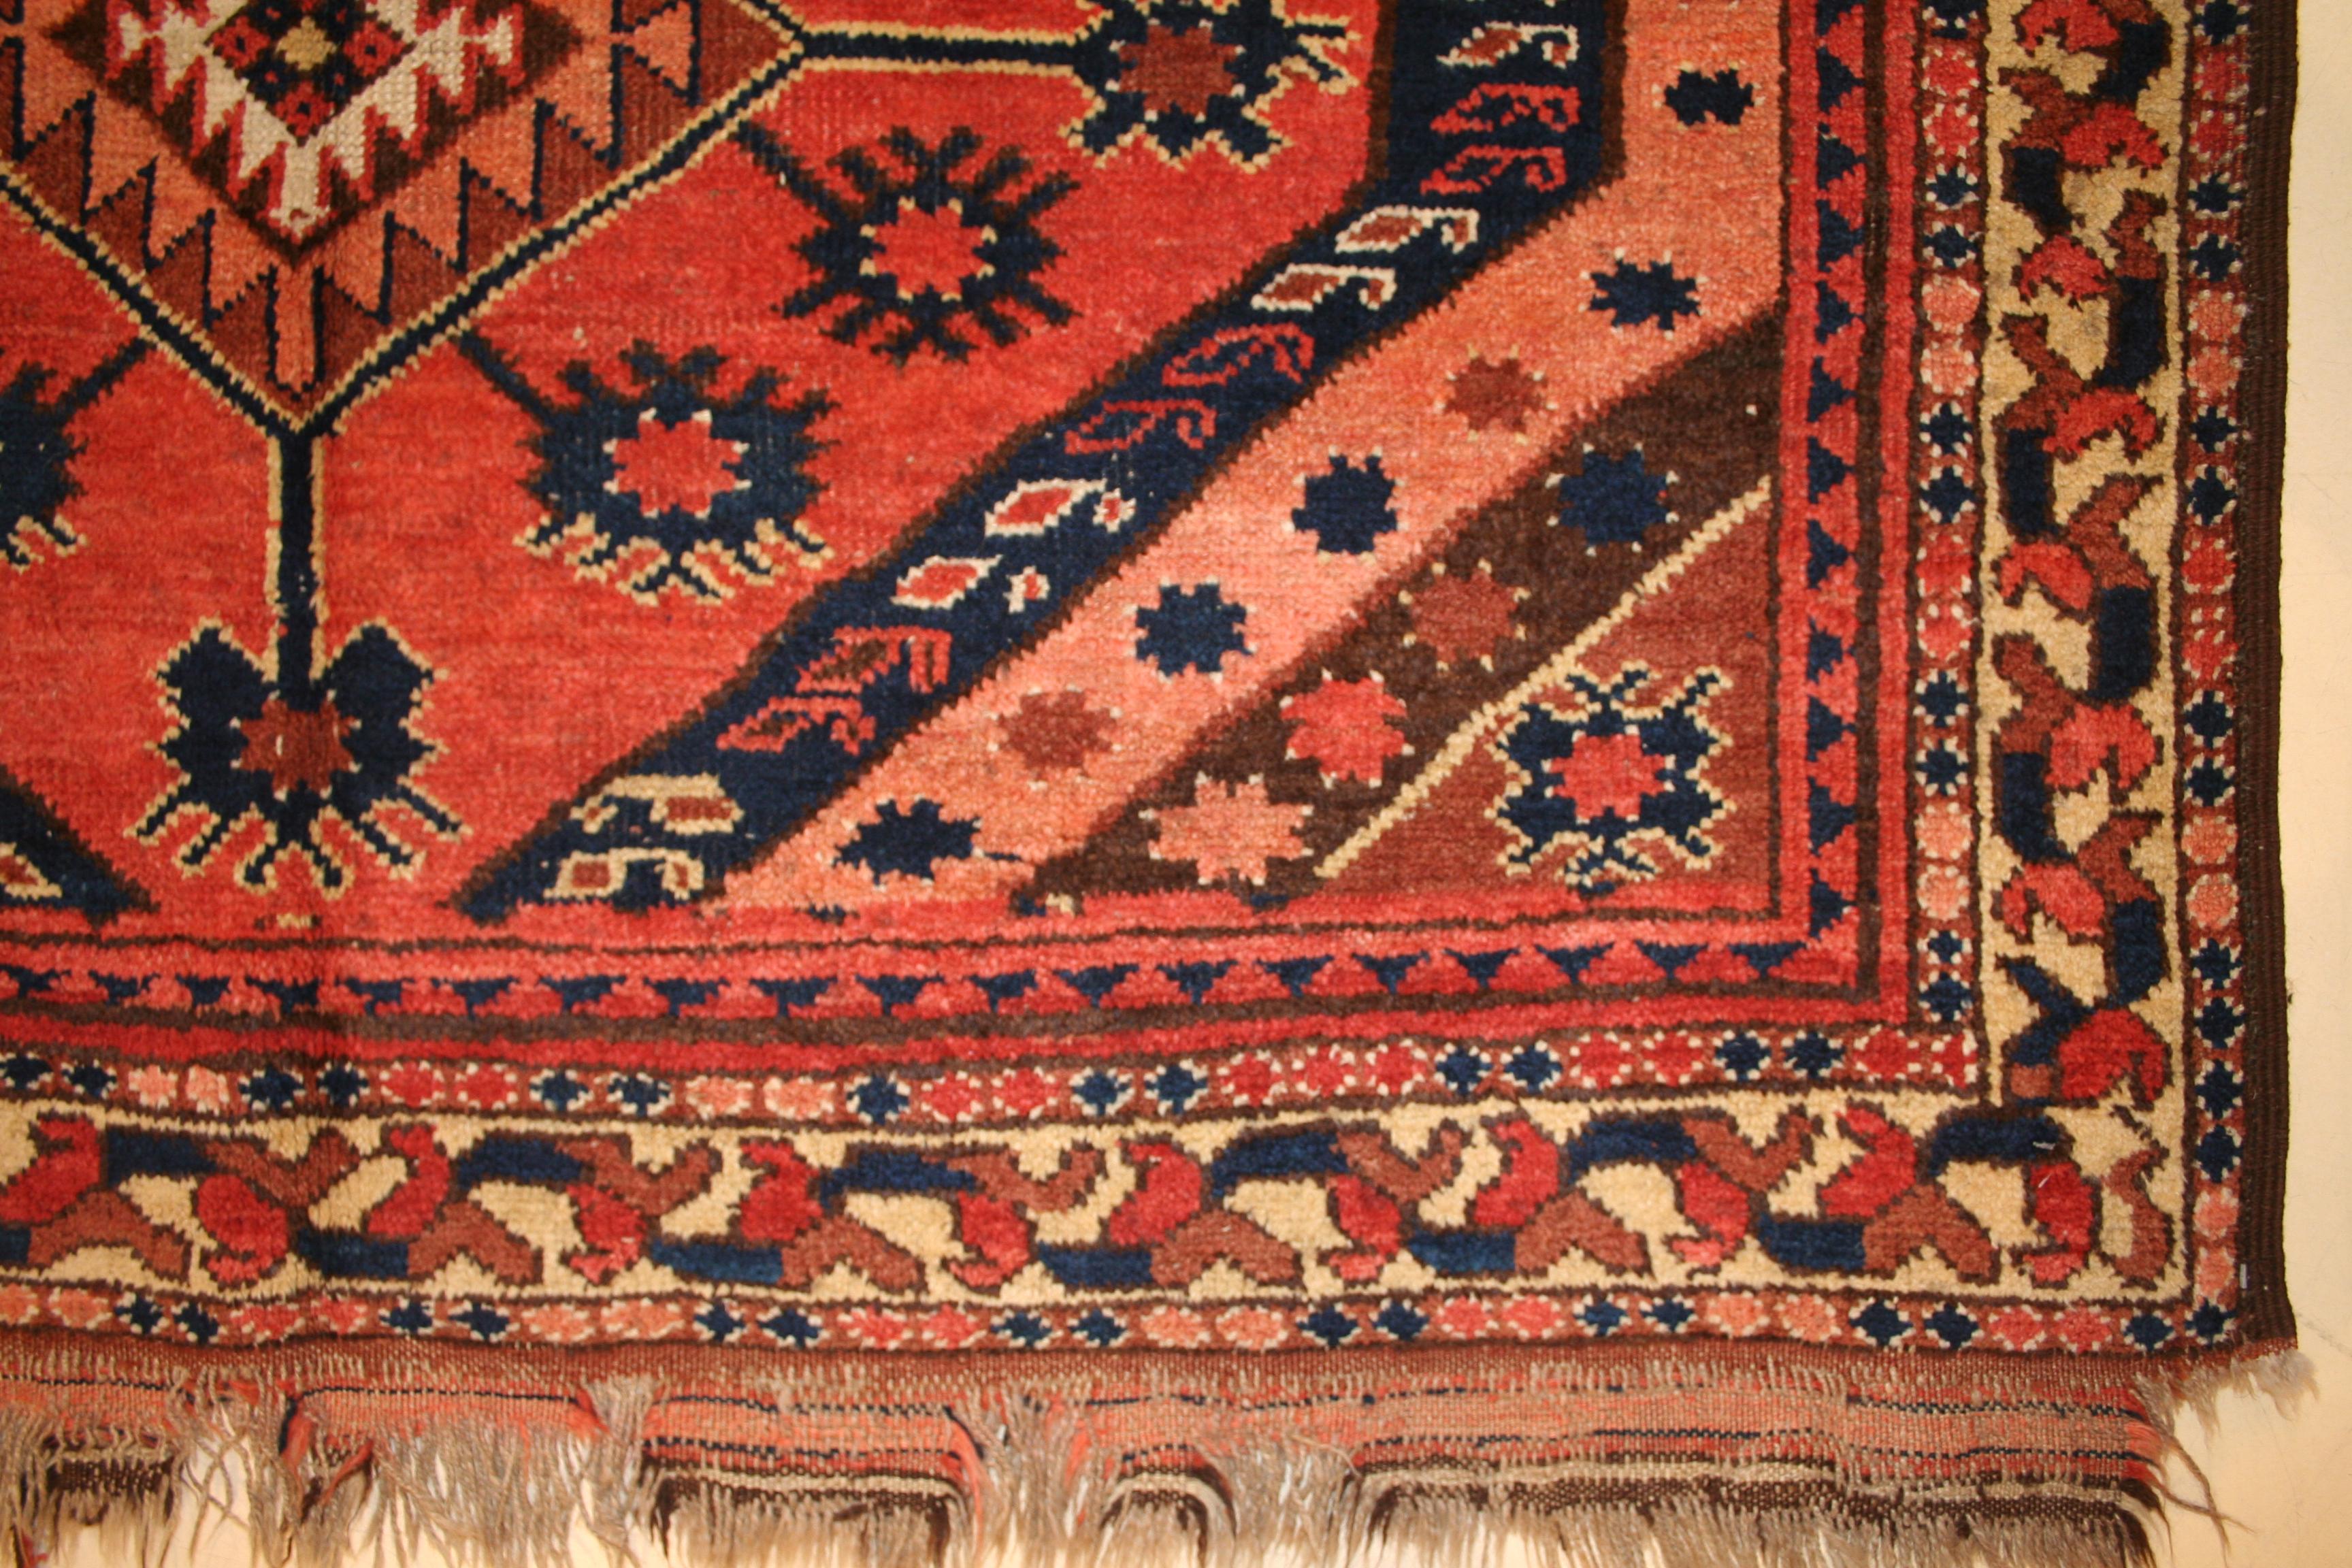 A richly coloured Uzbek tribal main carpet, decorated by a central row of three large diamonds with appendages. The rug is in very good condition, in full pile with original sides and ends. The colours are all natural and of vegetable origin. A